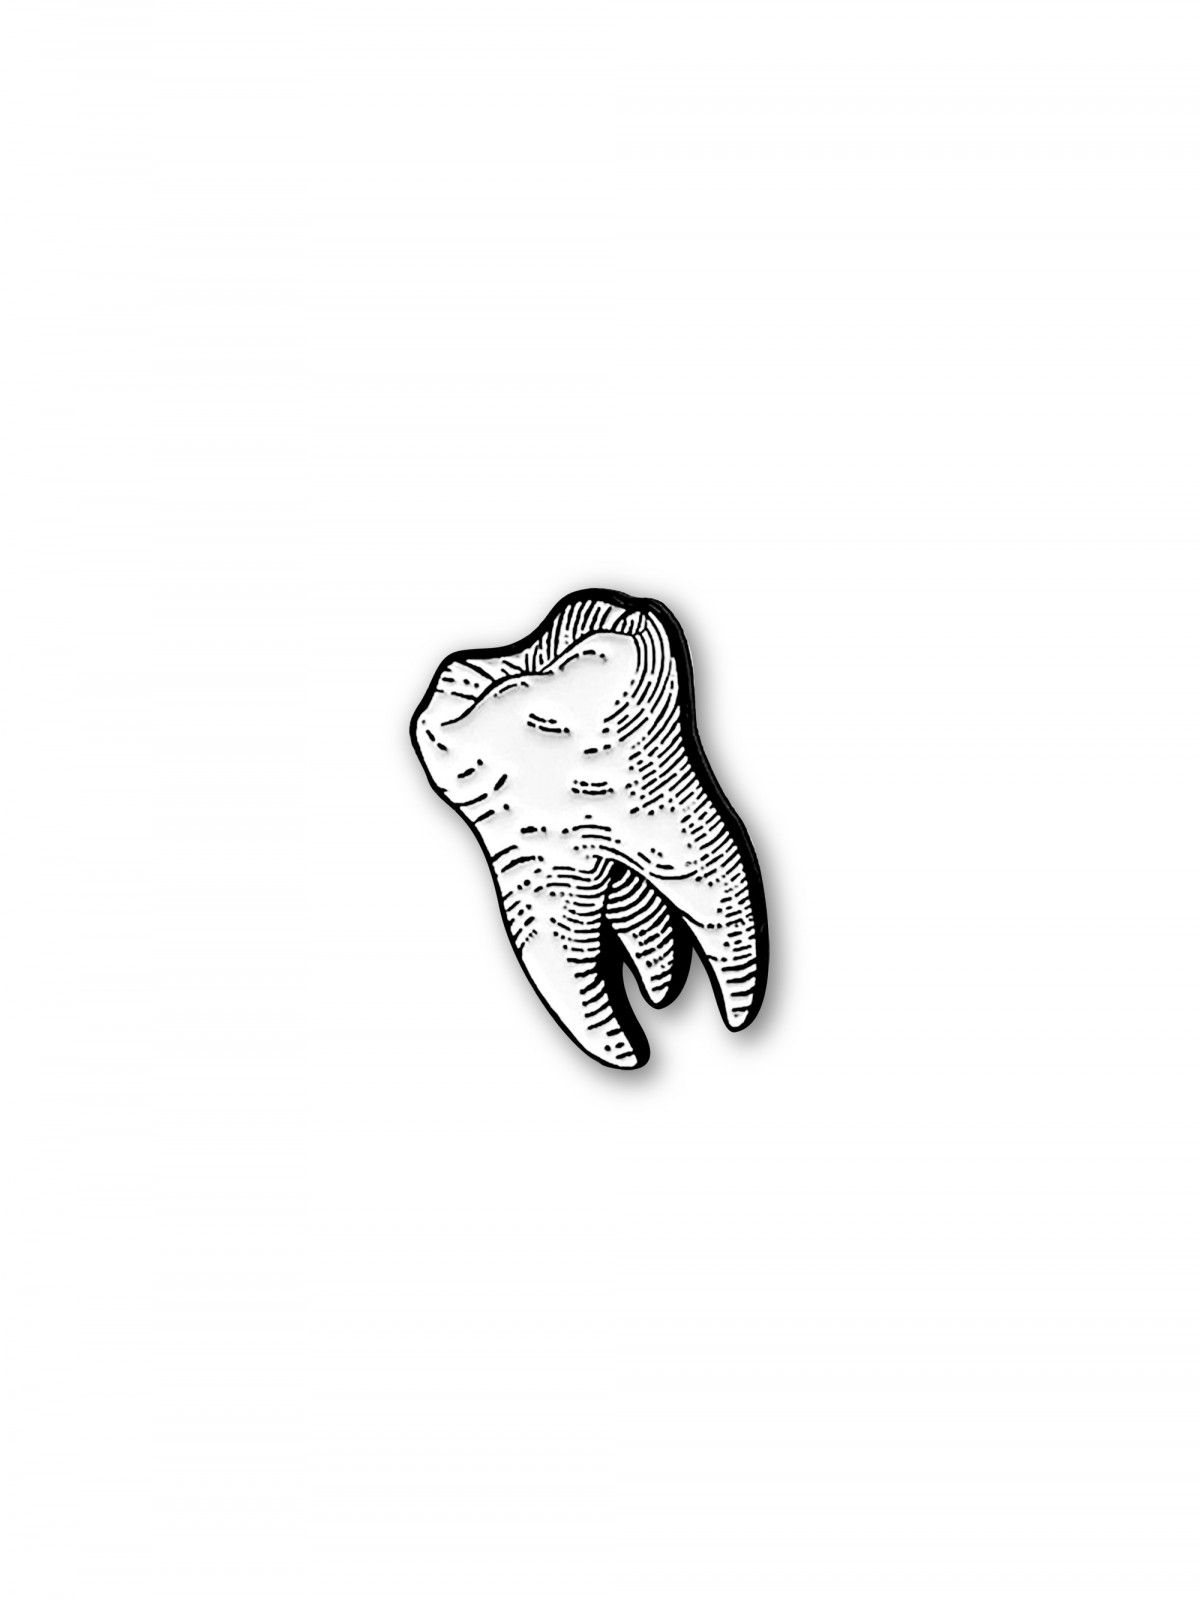 'Tooth' pin badge (made of steel) for men and women by swiss streetwear brand bastonnade clothing